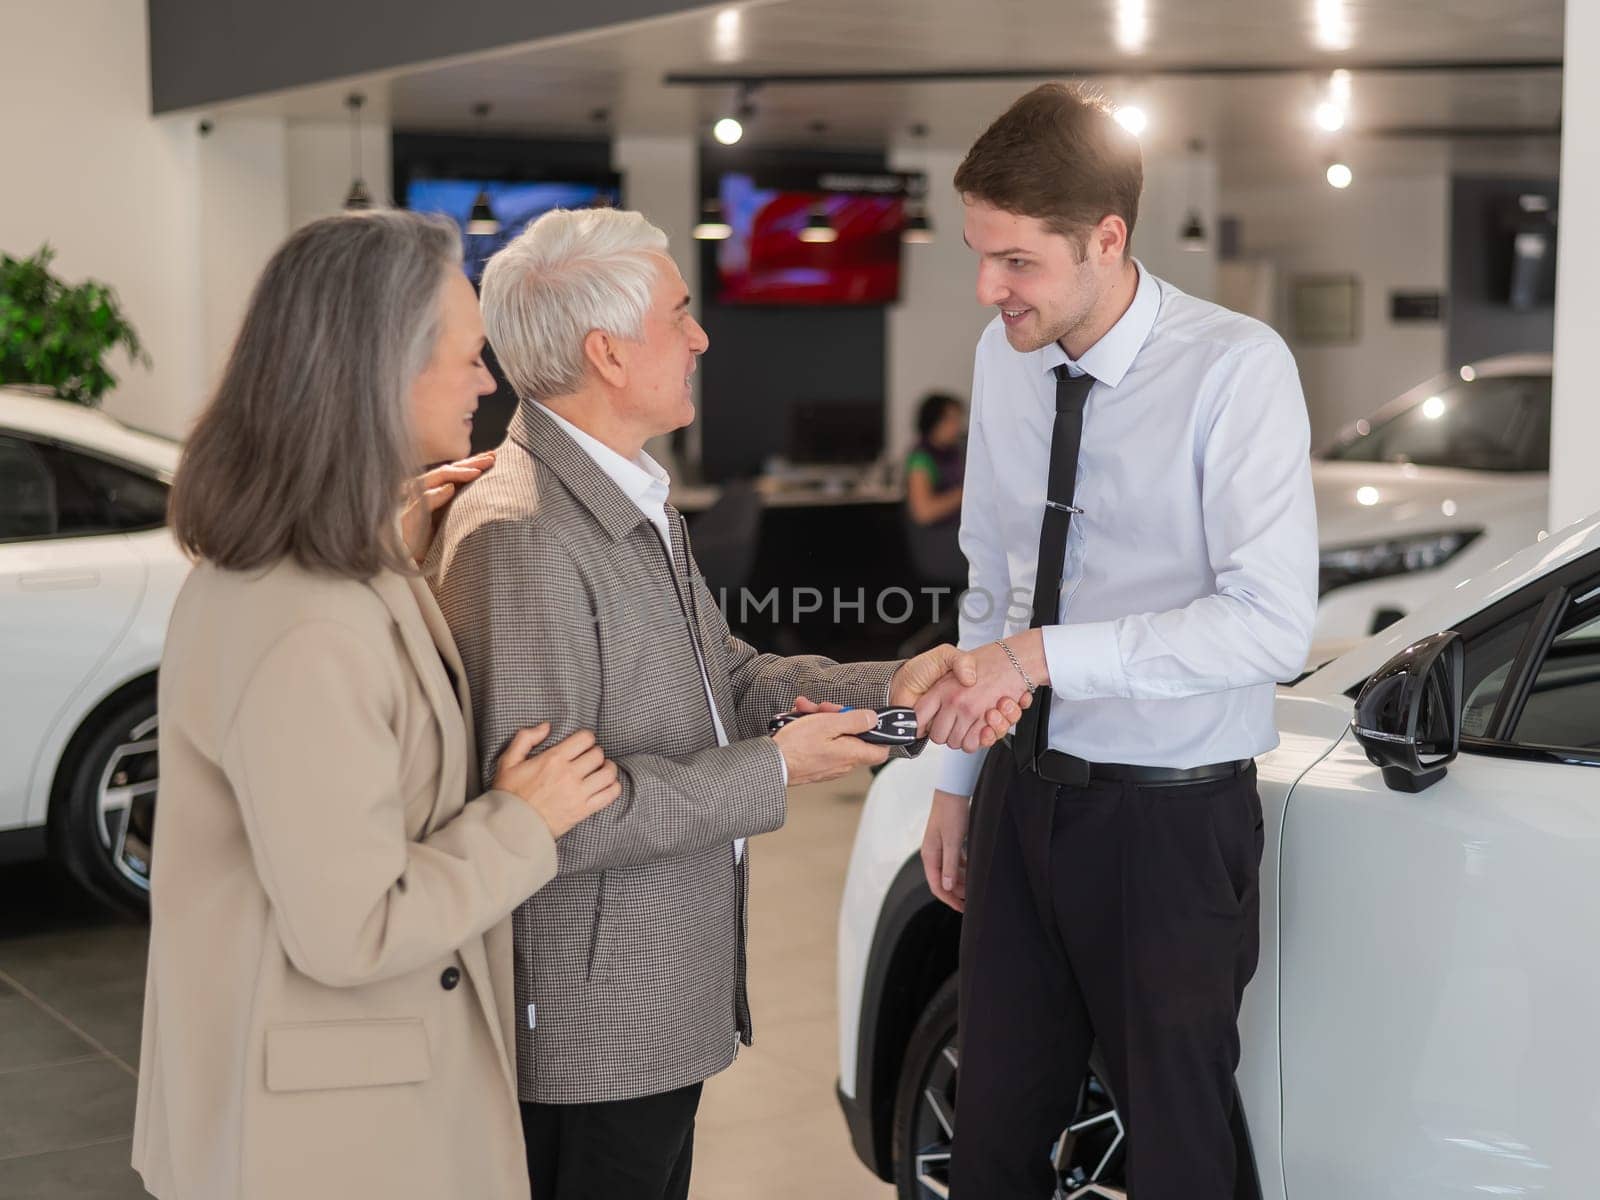 A salesman hands over the keys to a new car to an elderly Caucasian couple. by mrwed54